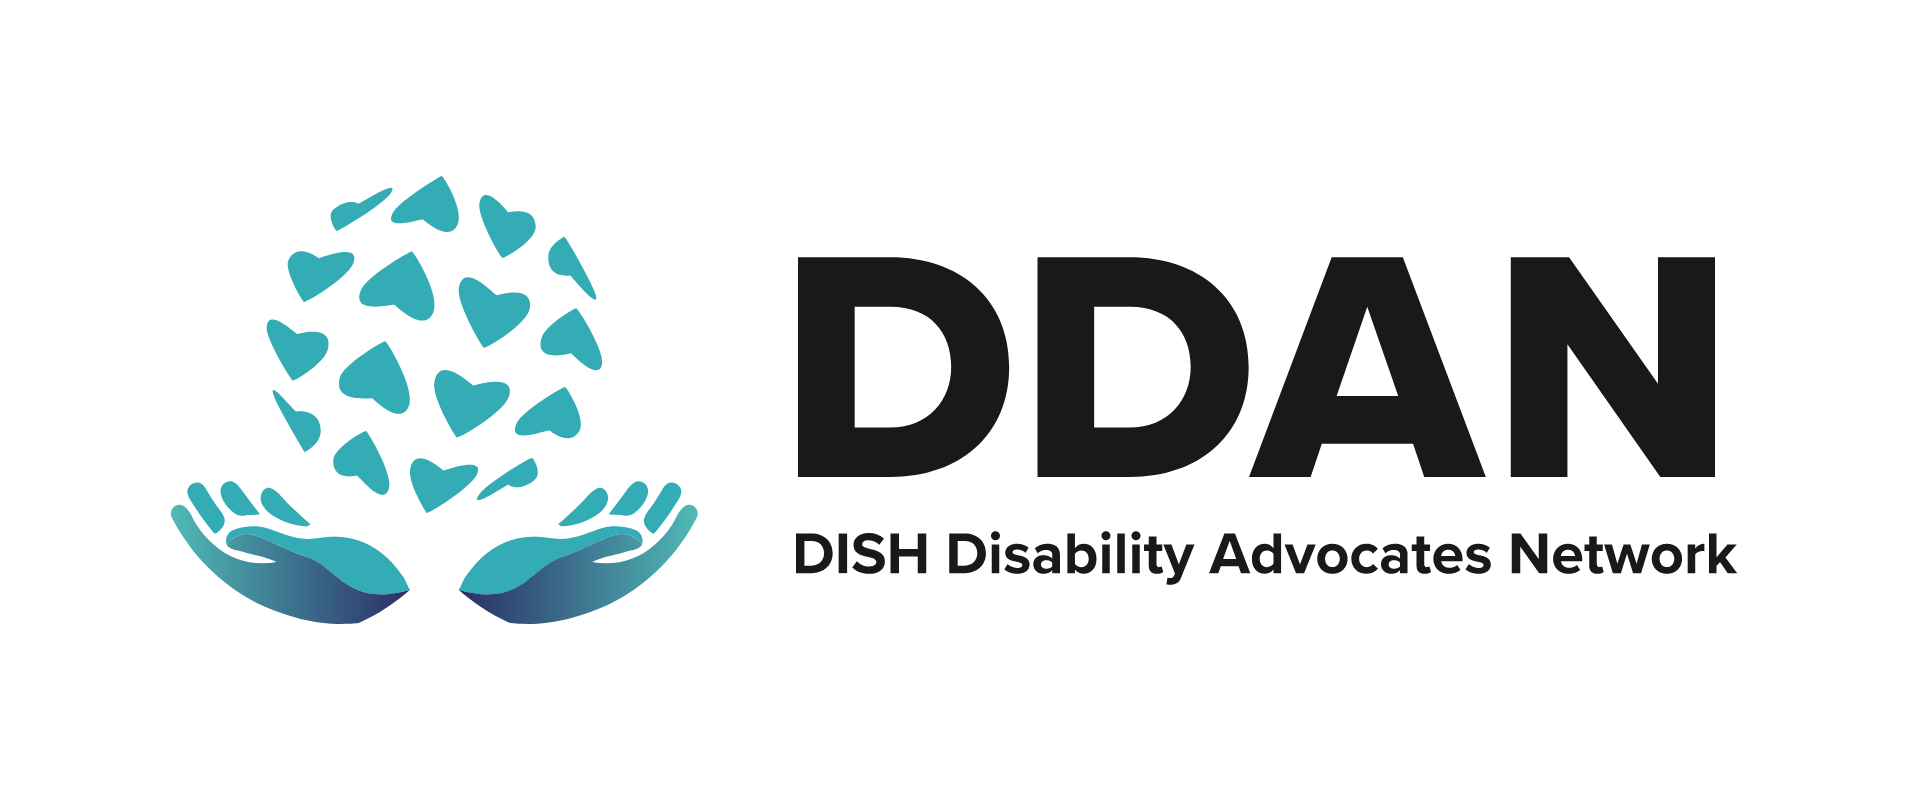 DISH Disability Advocates Network employee resource group company with initiatives for professionals with disabilities